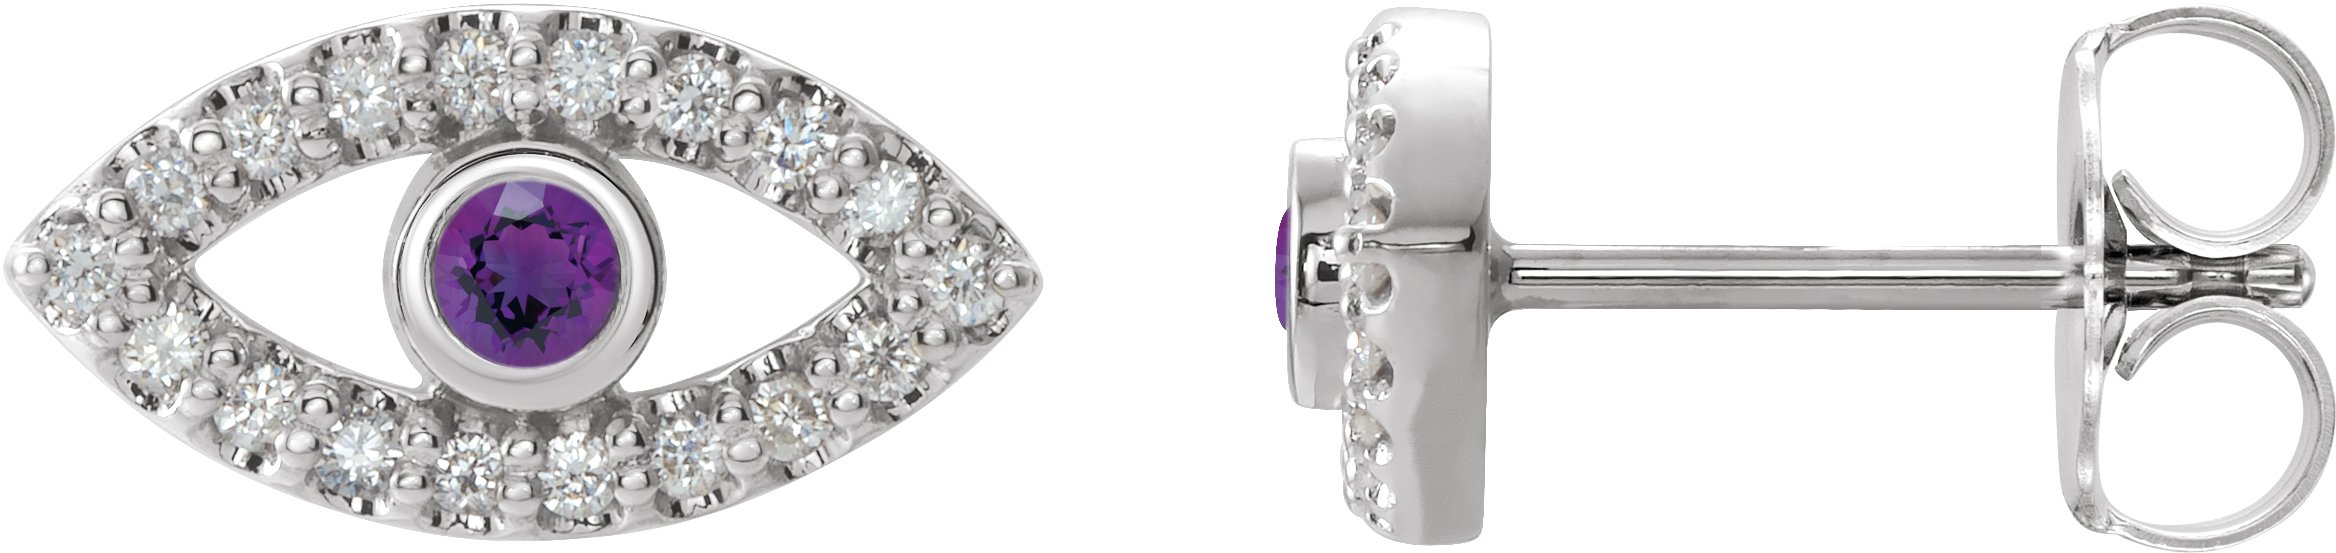 Platinum Amethyst and White Sapphire Earrings Ref. 15594041